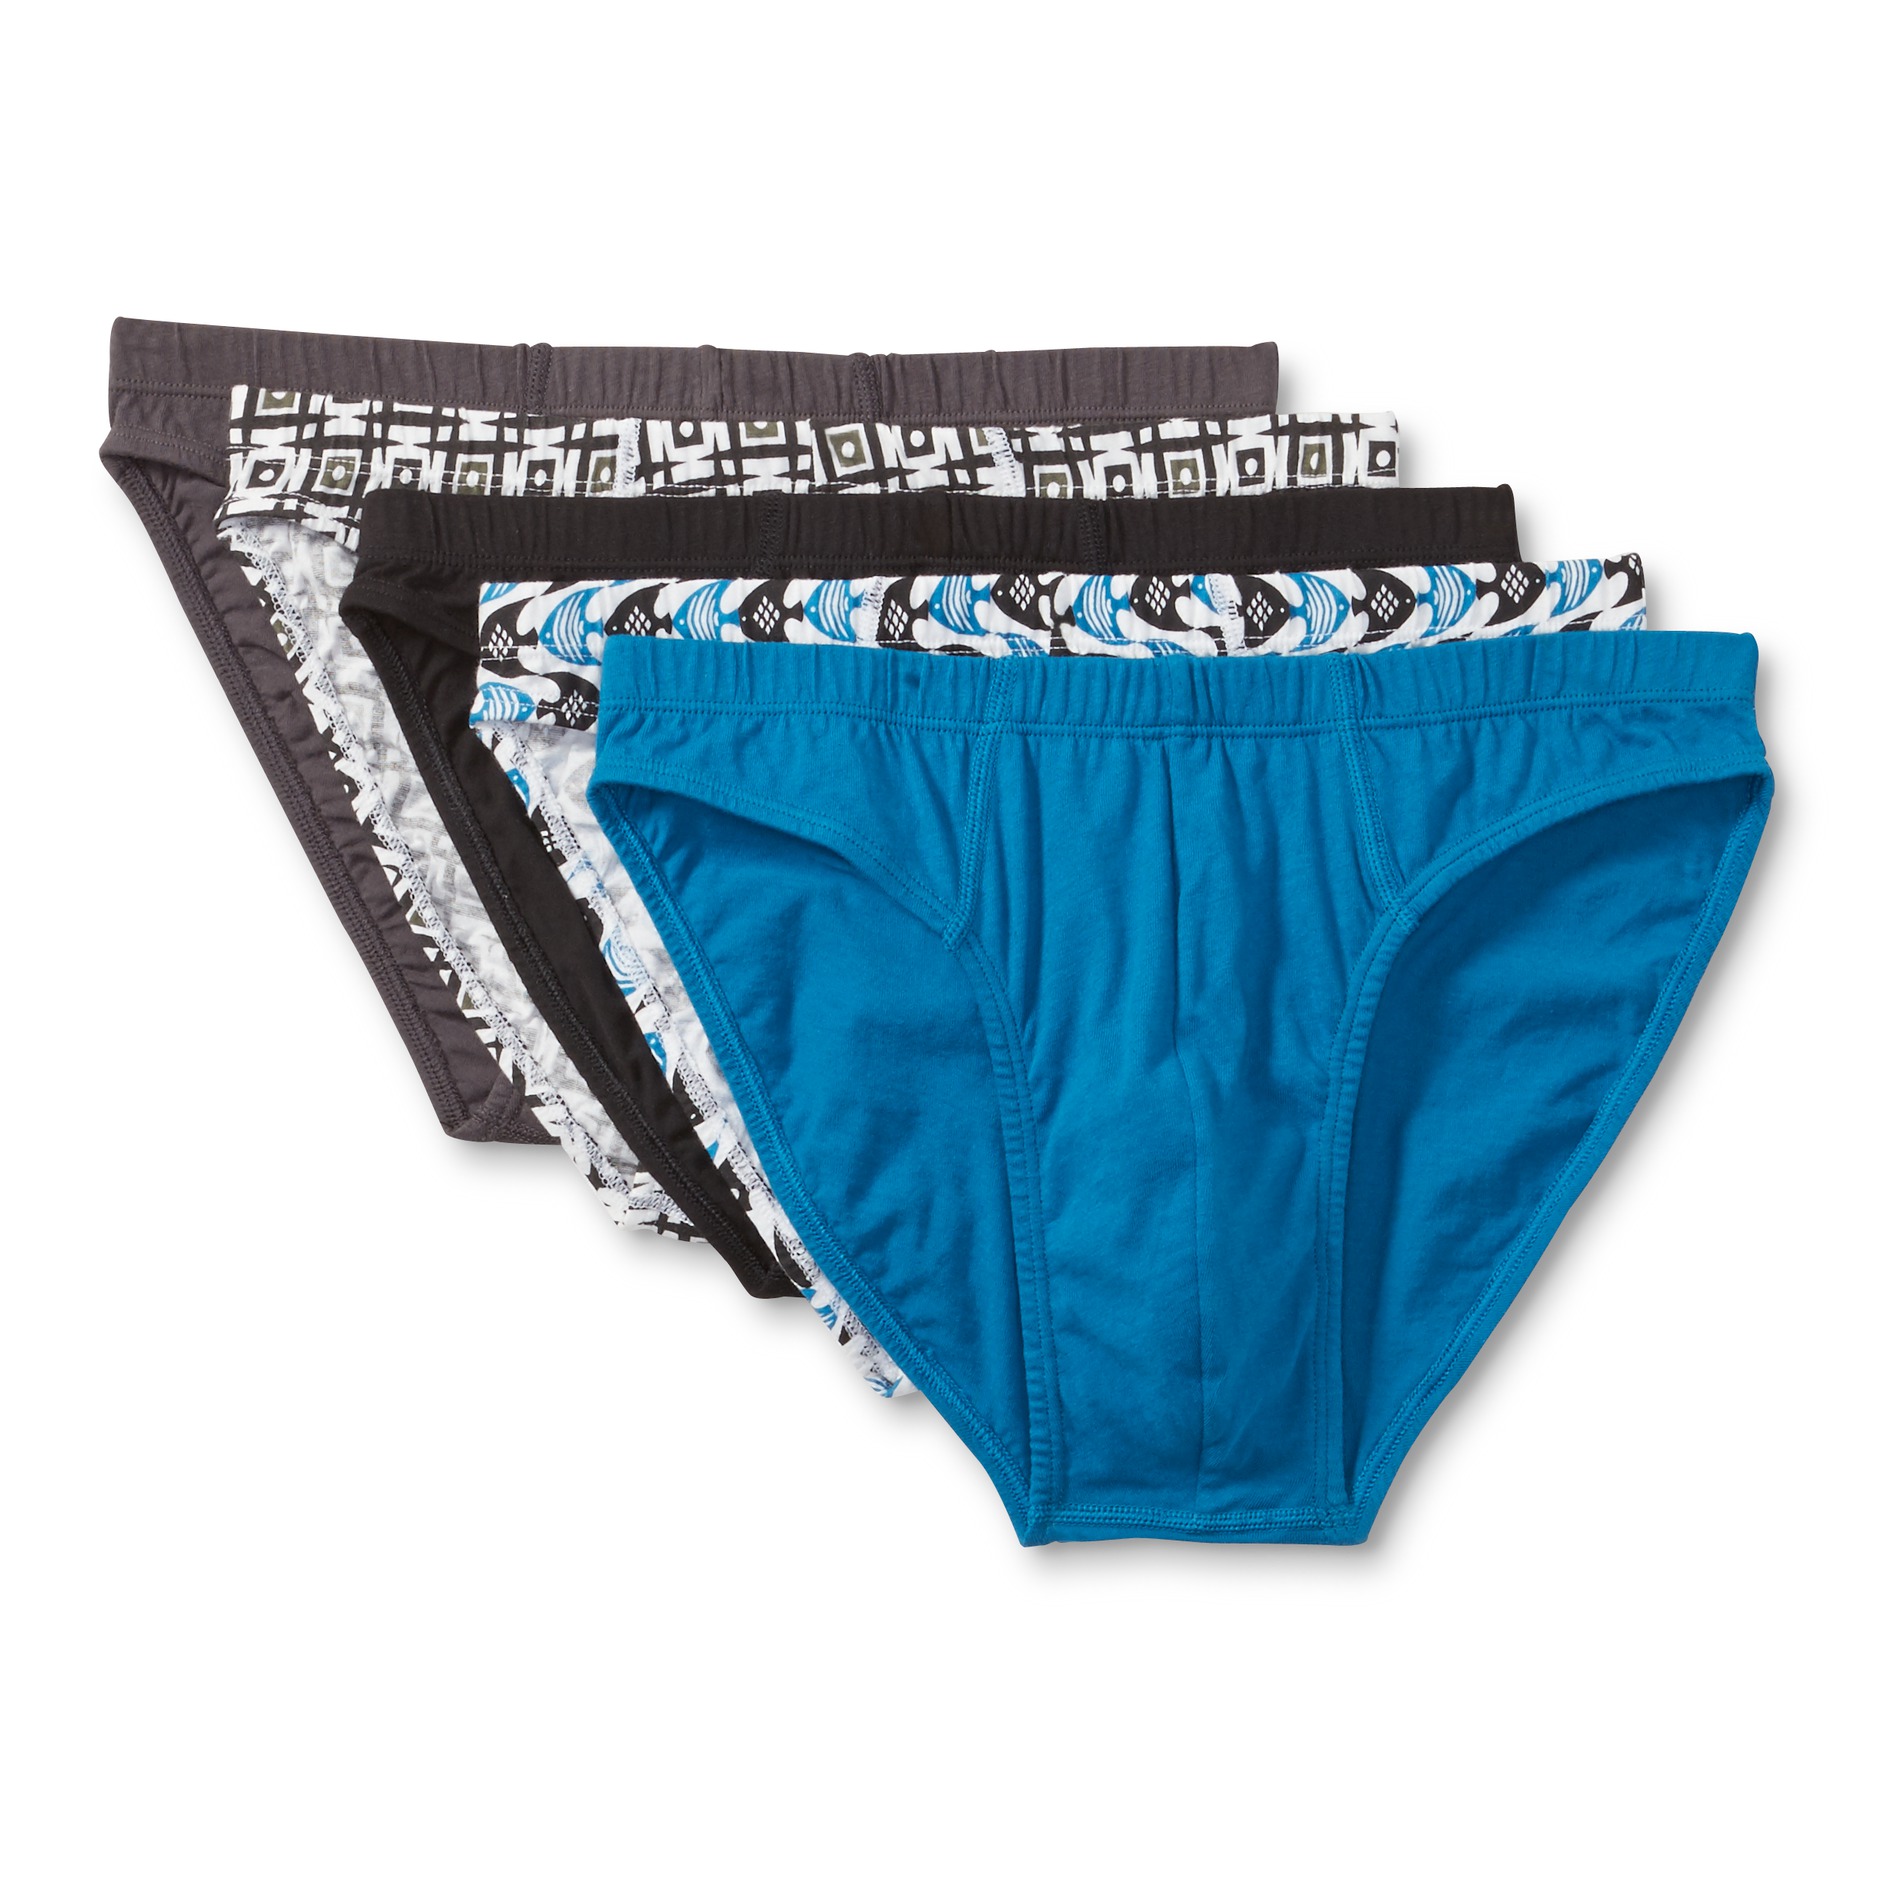 Simply Styled Men's 5-Pack Bikini Briefs - Solid & Mixed Patterns